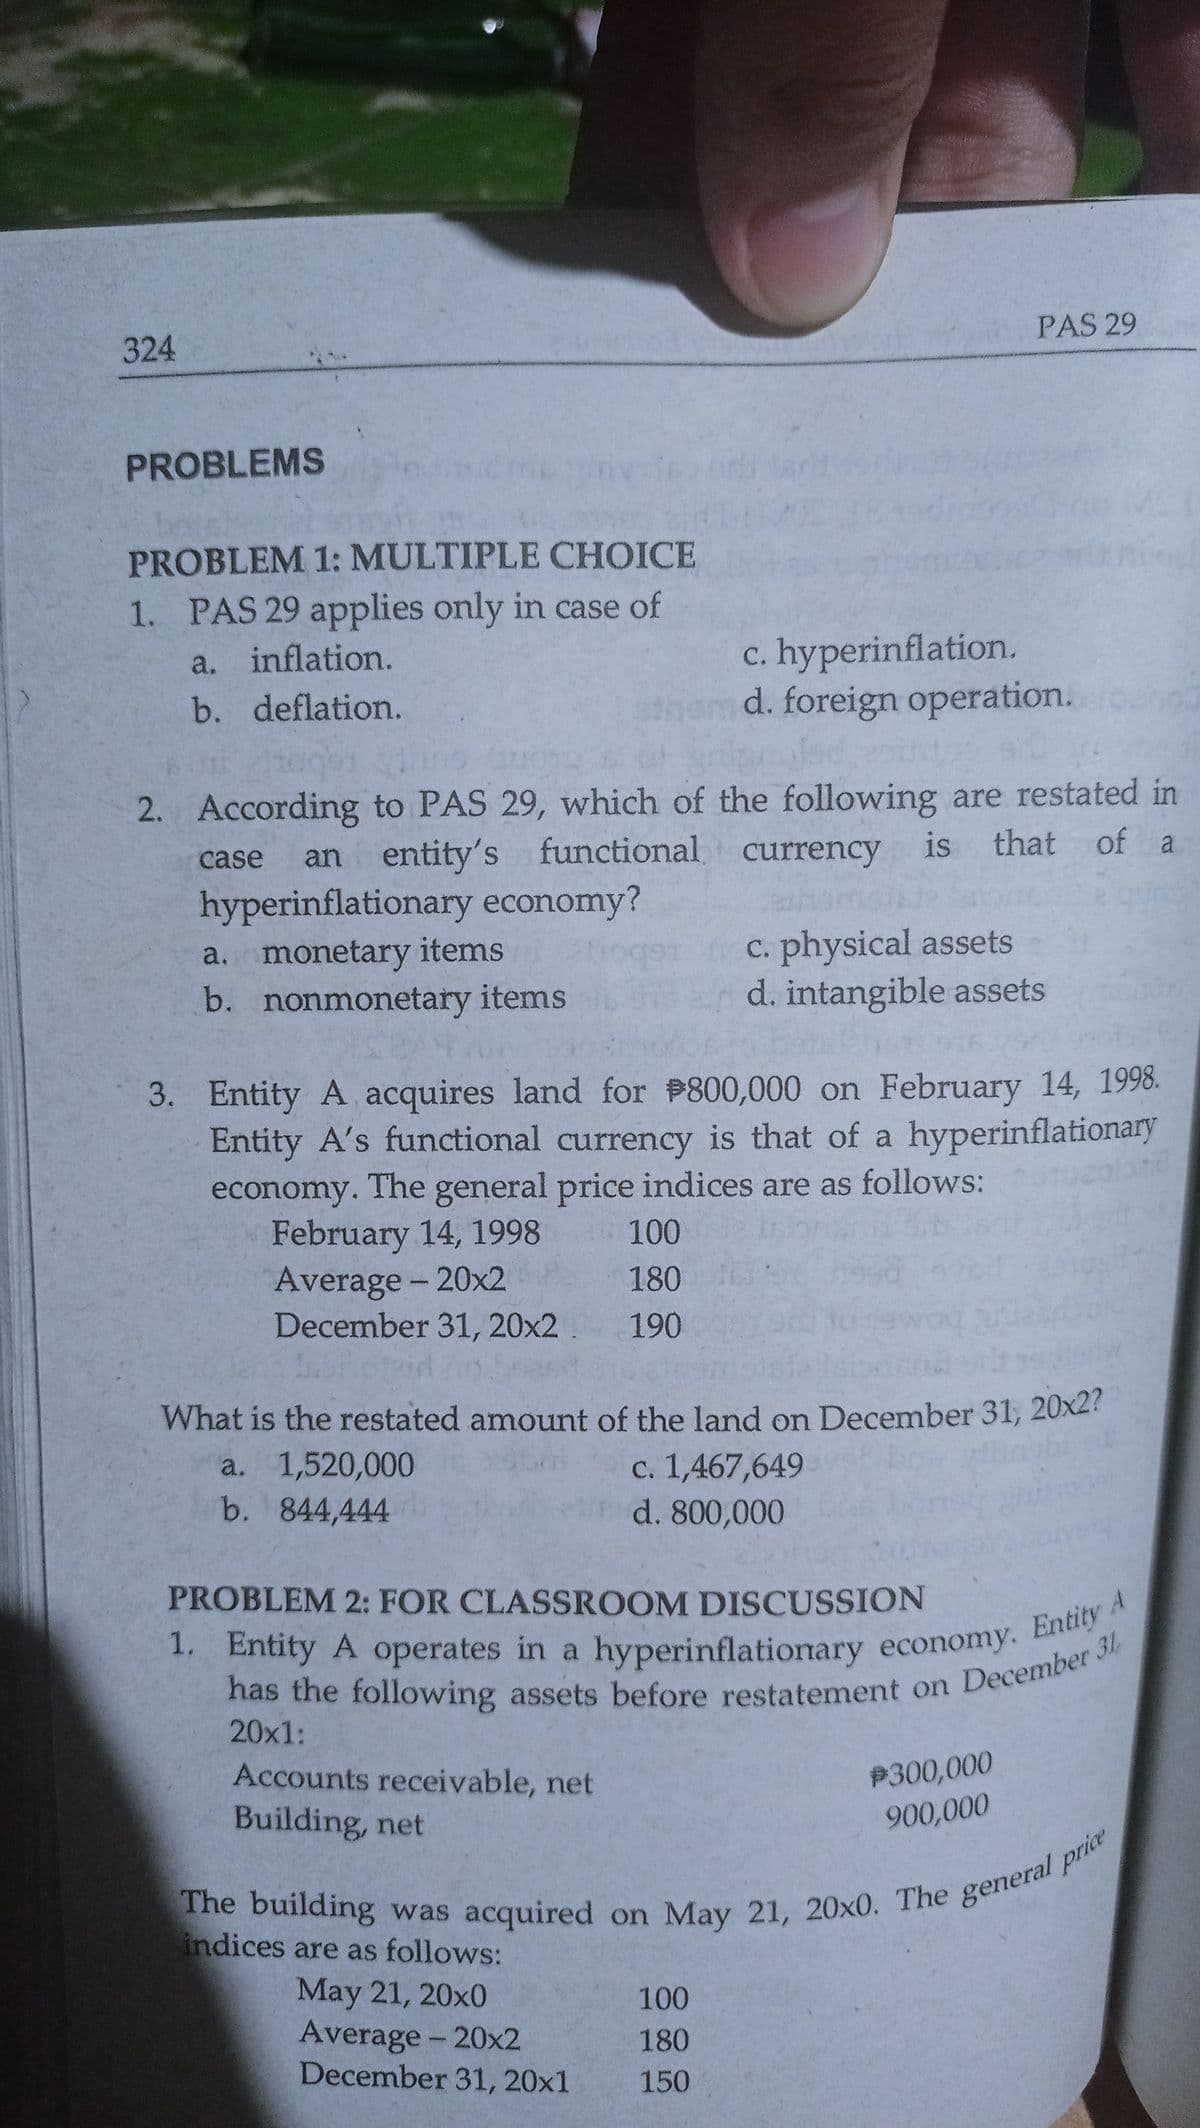 1. Entity A operates in a hyperinflationary economy. Entity
PAS 29
324
PROBLEMS
PROBLEM 1: MULTIPLE CHOICE
1. PAS 29 applies only in case of
c. hyperinflation.
hem d. foreign operation.
a. inflation.
b. deflation.
2. According to PAS 29, which of the following are restated in
an entity's functional currency is
hyperinflationary economy?
a. monetary items
b. nonmonetary items
that of a
case
C. physical assets
d. intangible assets
3. Entity A acquires land for 800,000 on February 14, 1998.
Entity A's functional currency is that of a hyperinflationary
economy. The general price indices are as follows:
February 14, 1998
Average - 20x2
December 31, 20x2
100
180
190
What is the restated amount of the land on December 31, 20x27
a. 1,520,000
b. 844,444
c. 1,467,649
d. 800,000
PROBLEM 2: FOR CLASSROOM DISCUSSION
nas the following assets before restatement on December
20x1:
Accounts receivable, net
P300,000
Building, net
900,000
indices are as follows:
May 21, 20x0
Average - 20x2
December 31, 20x1
100
180
150
